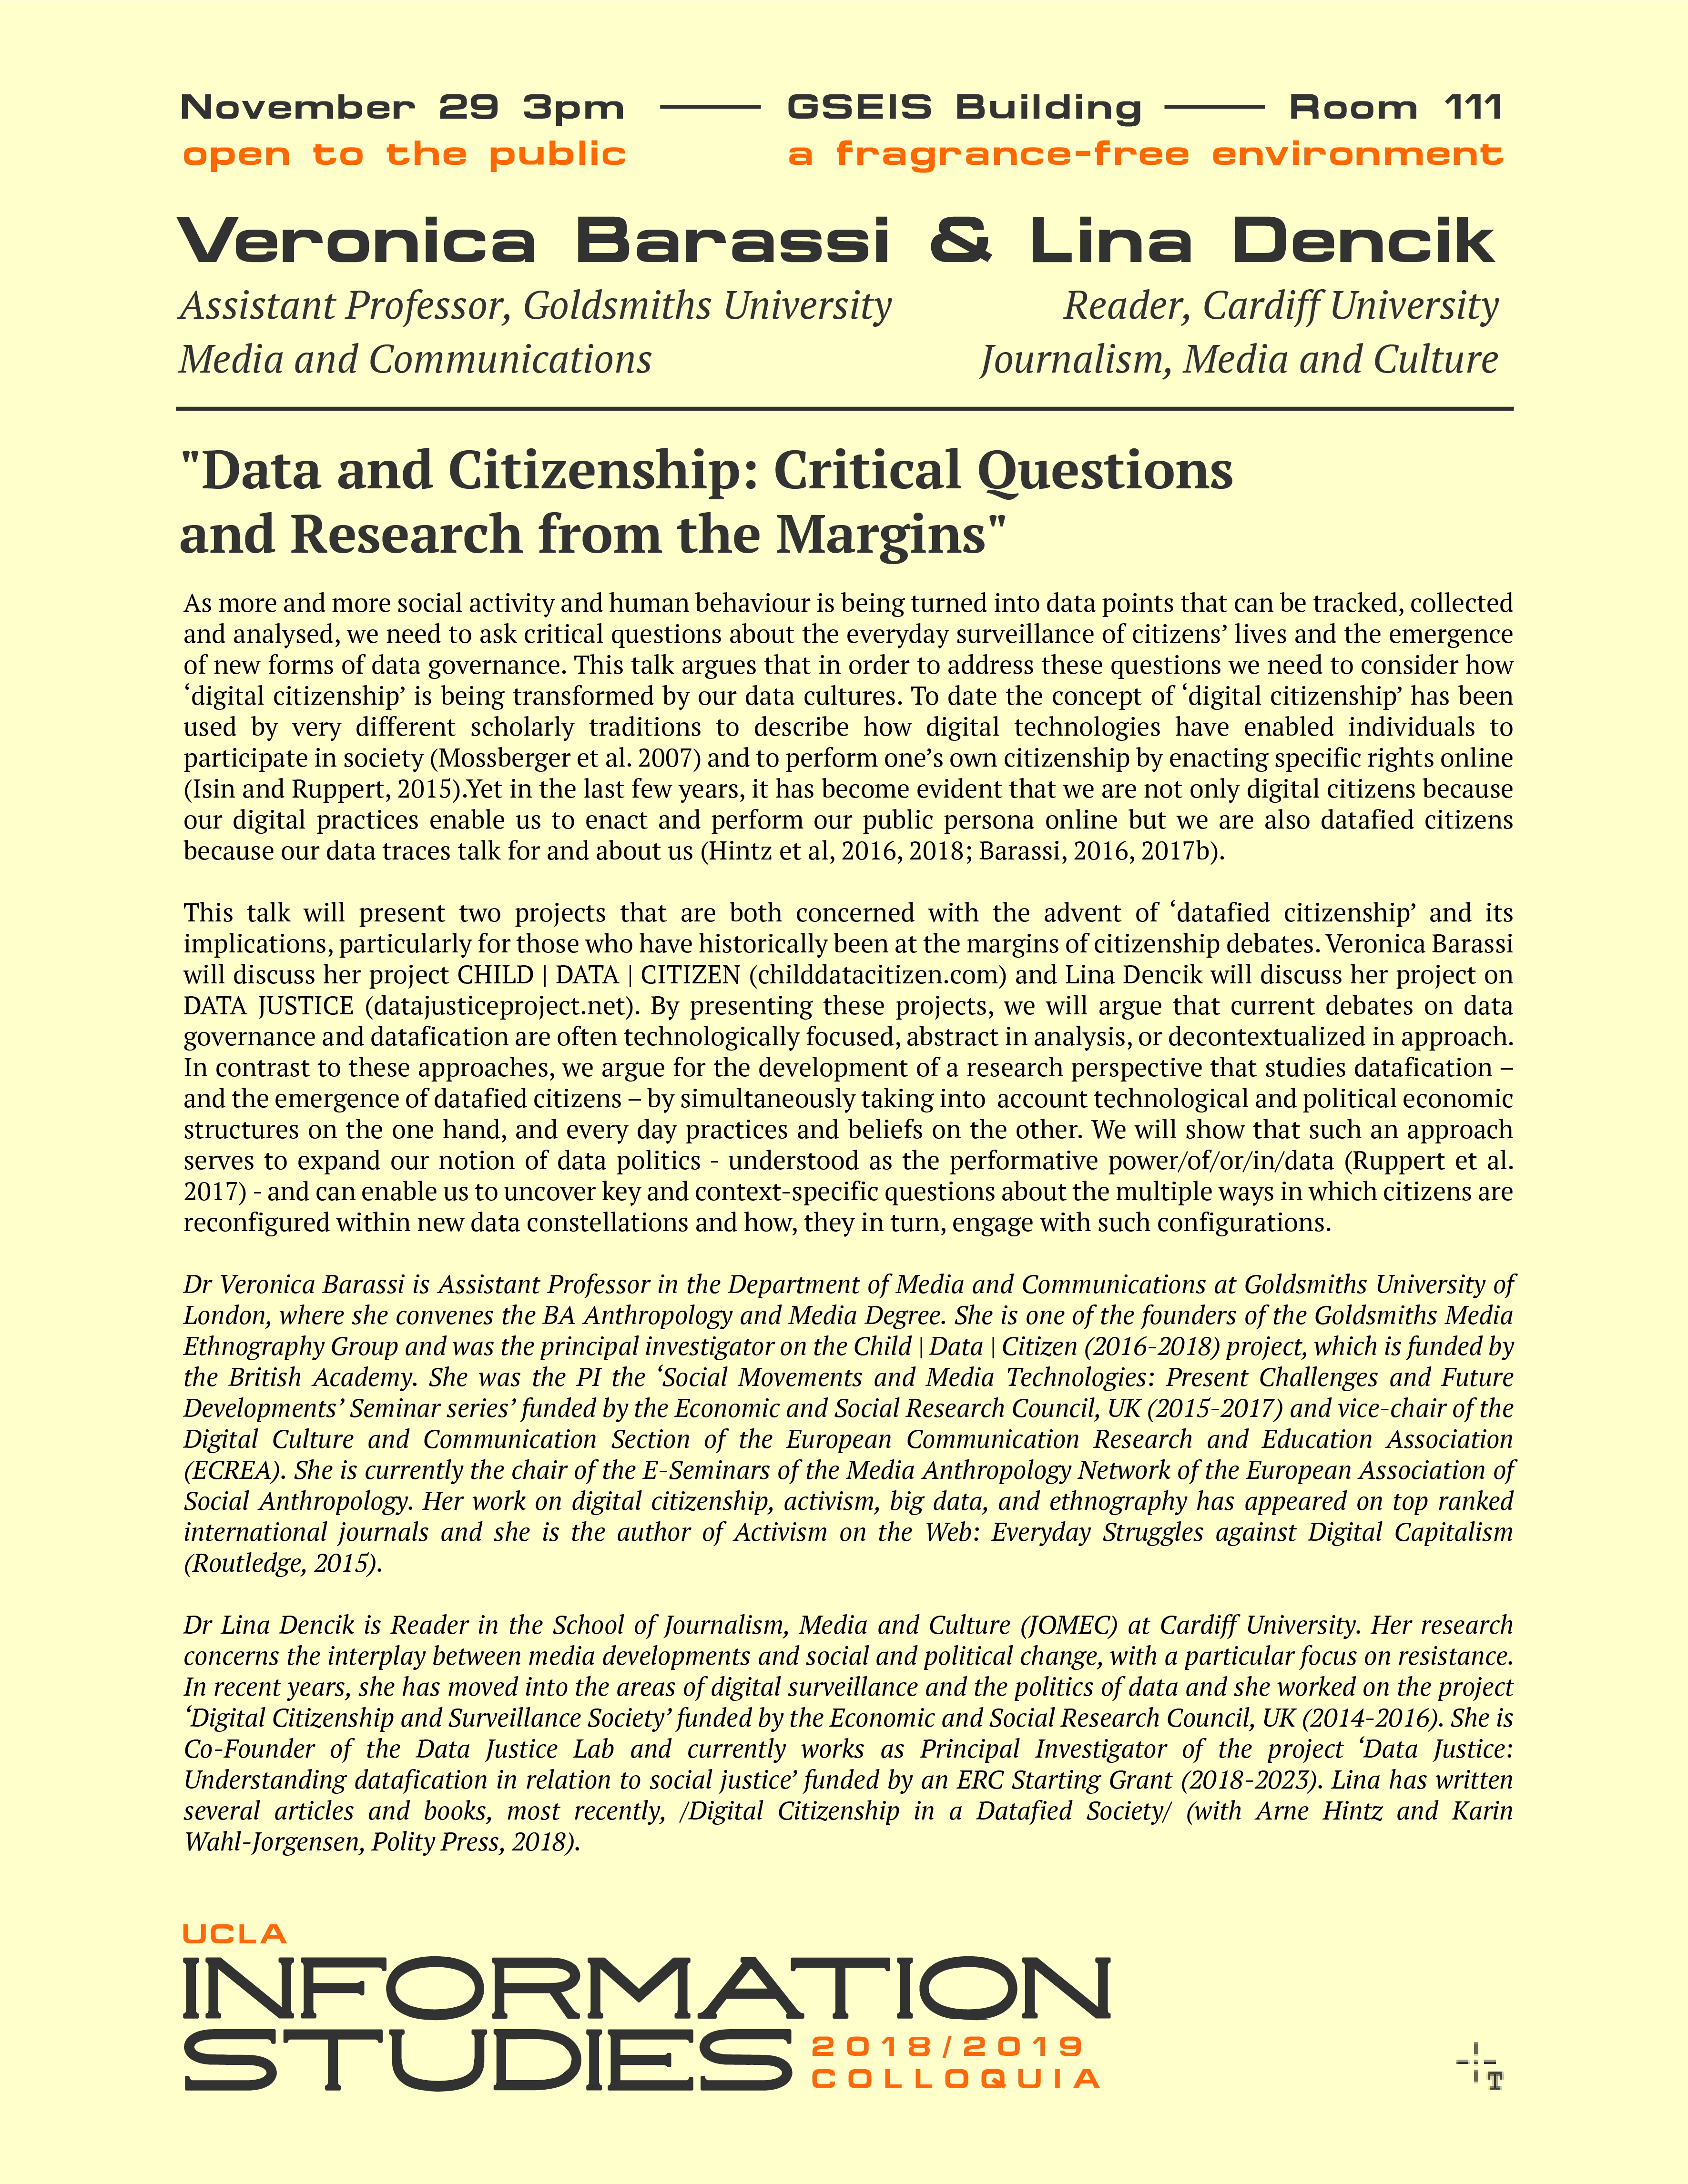 Data and Citizenship: Critical Questions and Research Perspectives from the Margins